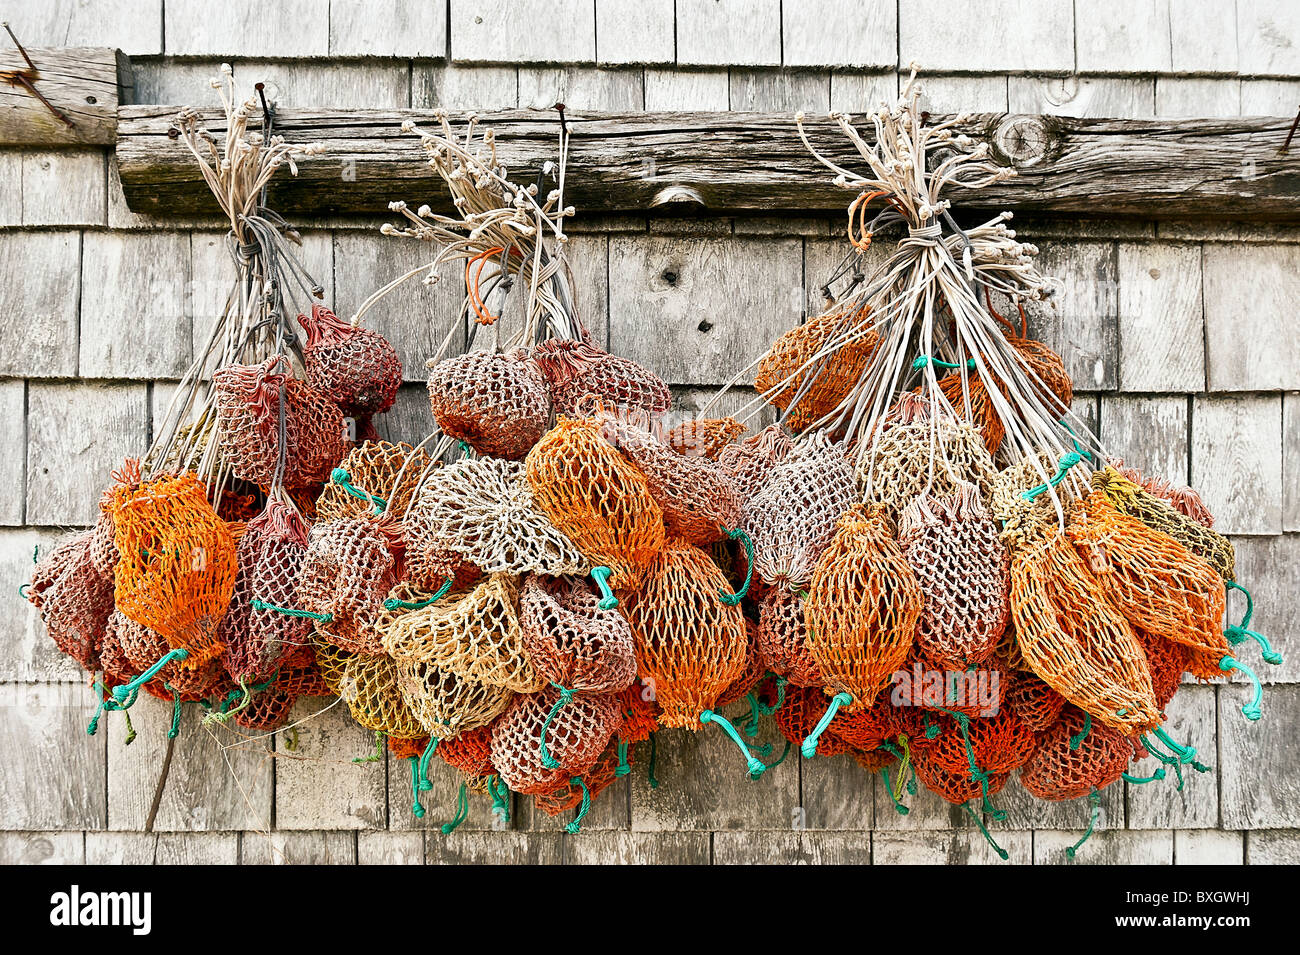 Bait bags hang from a dockside shed, Bass Harbor, Maine, USA Stock Photo